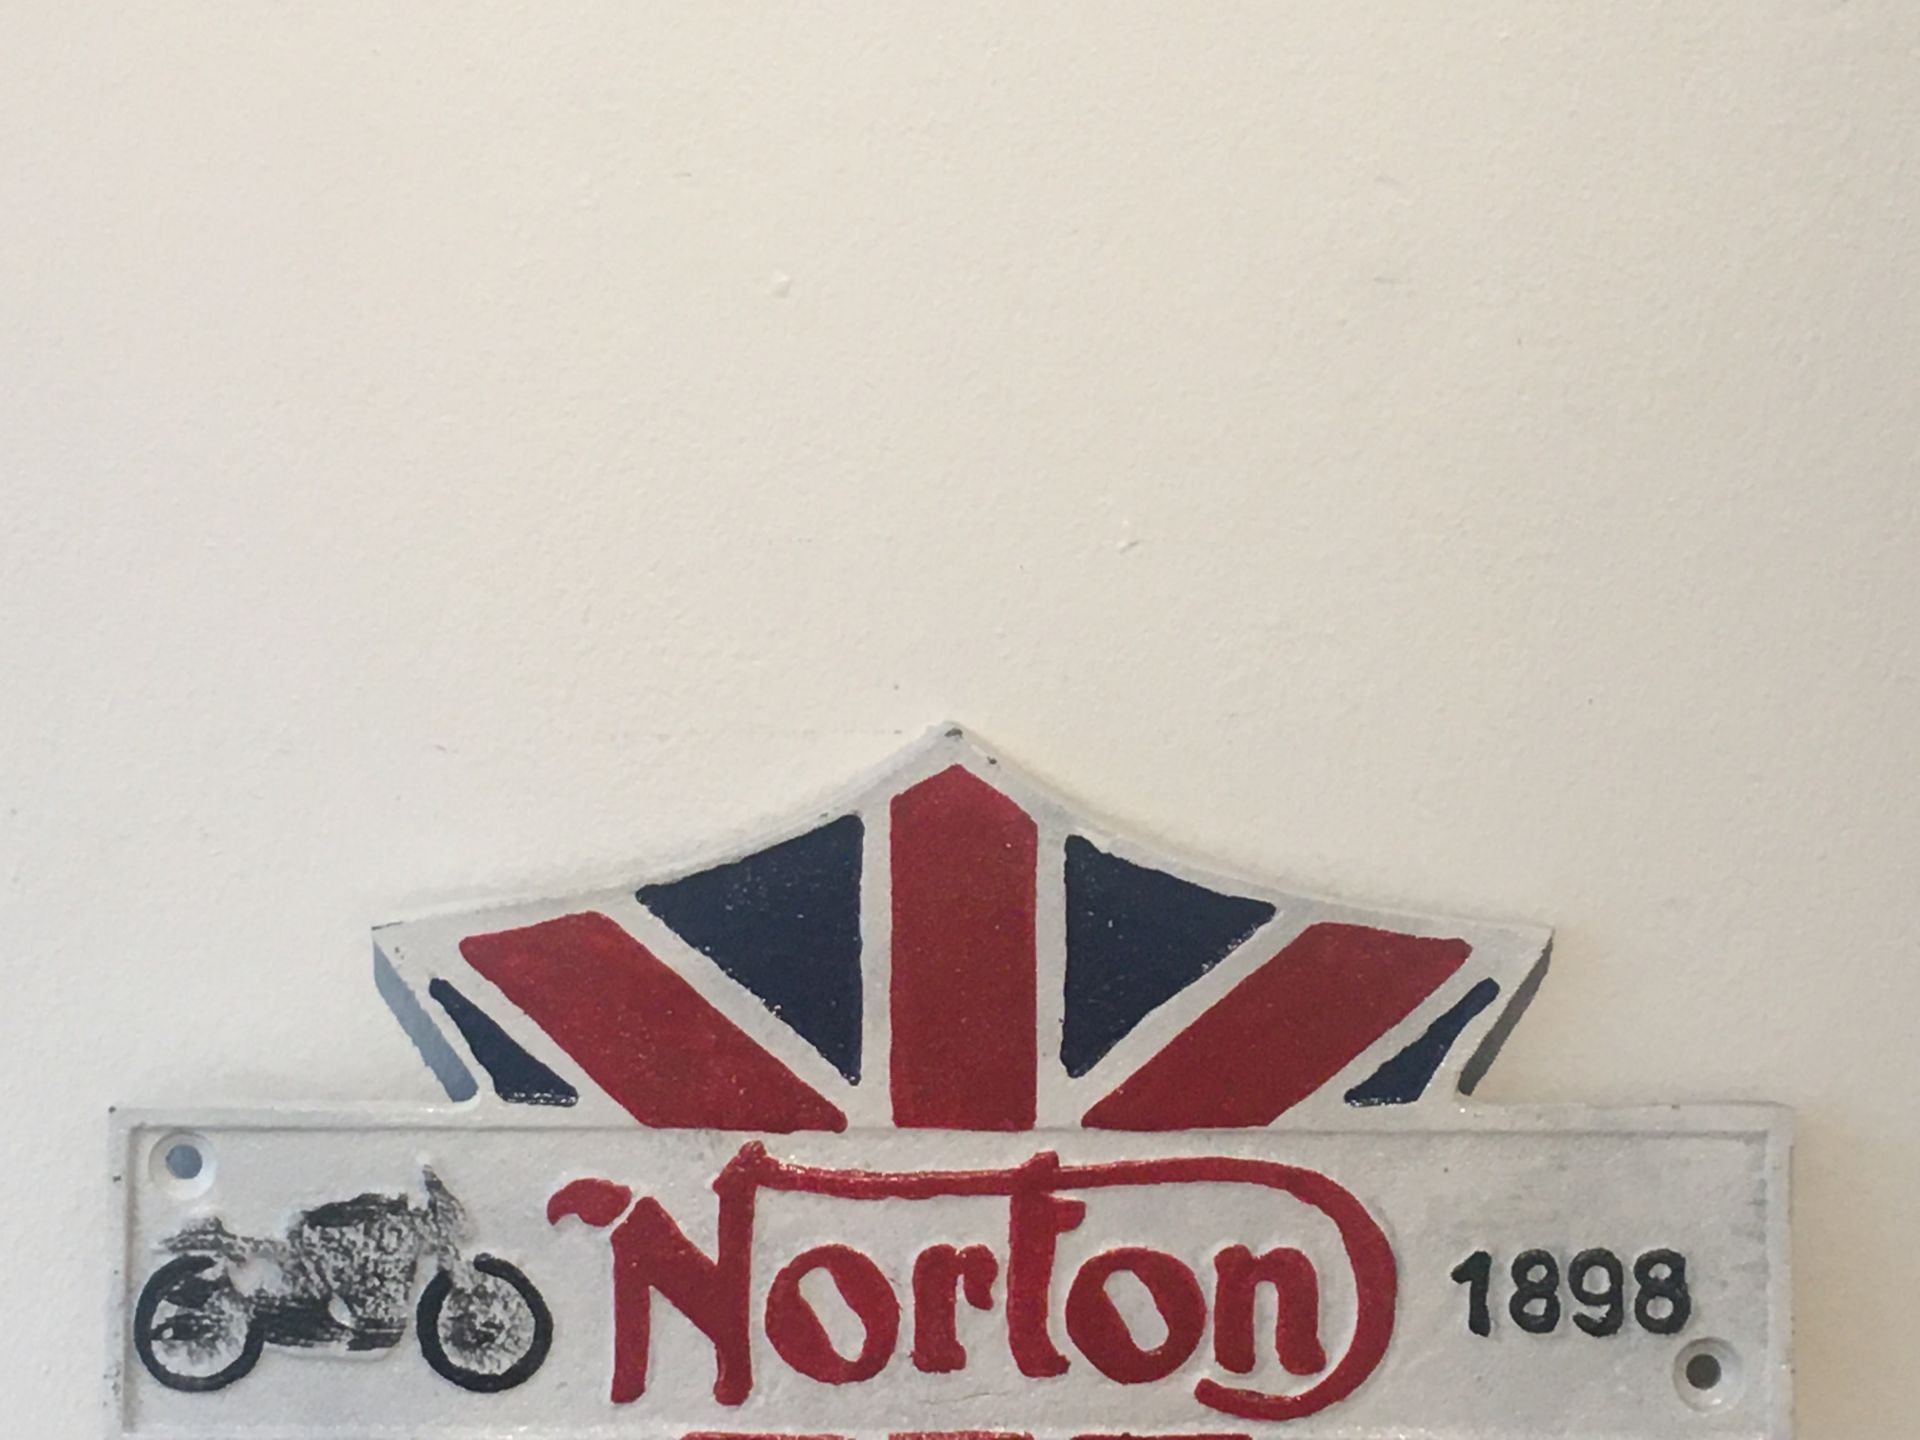 Norton Motorcycles 1898 Cast Iron Sign - Image 2 of 5